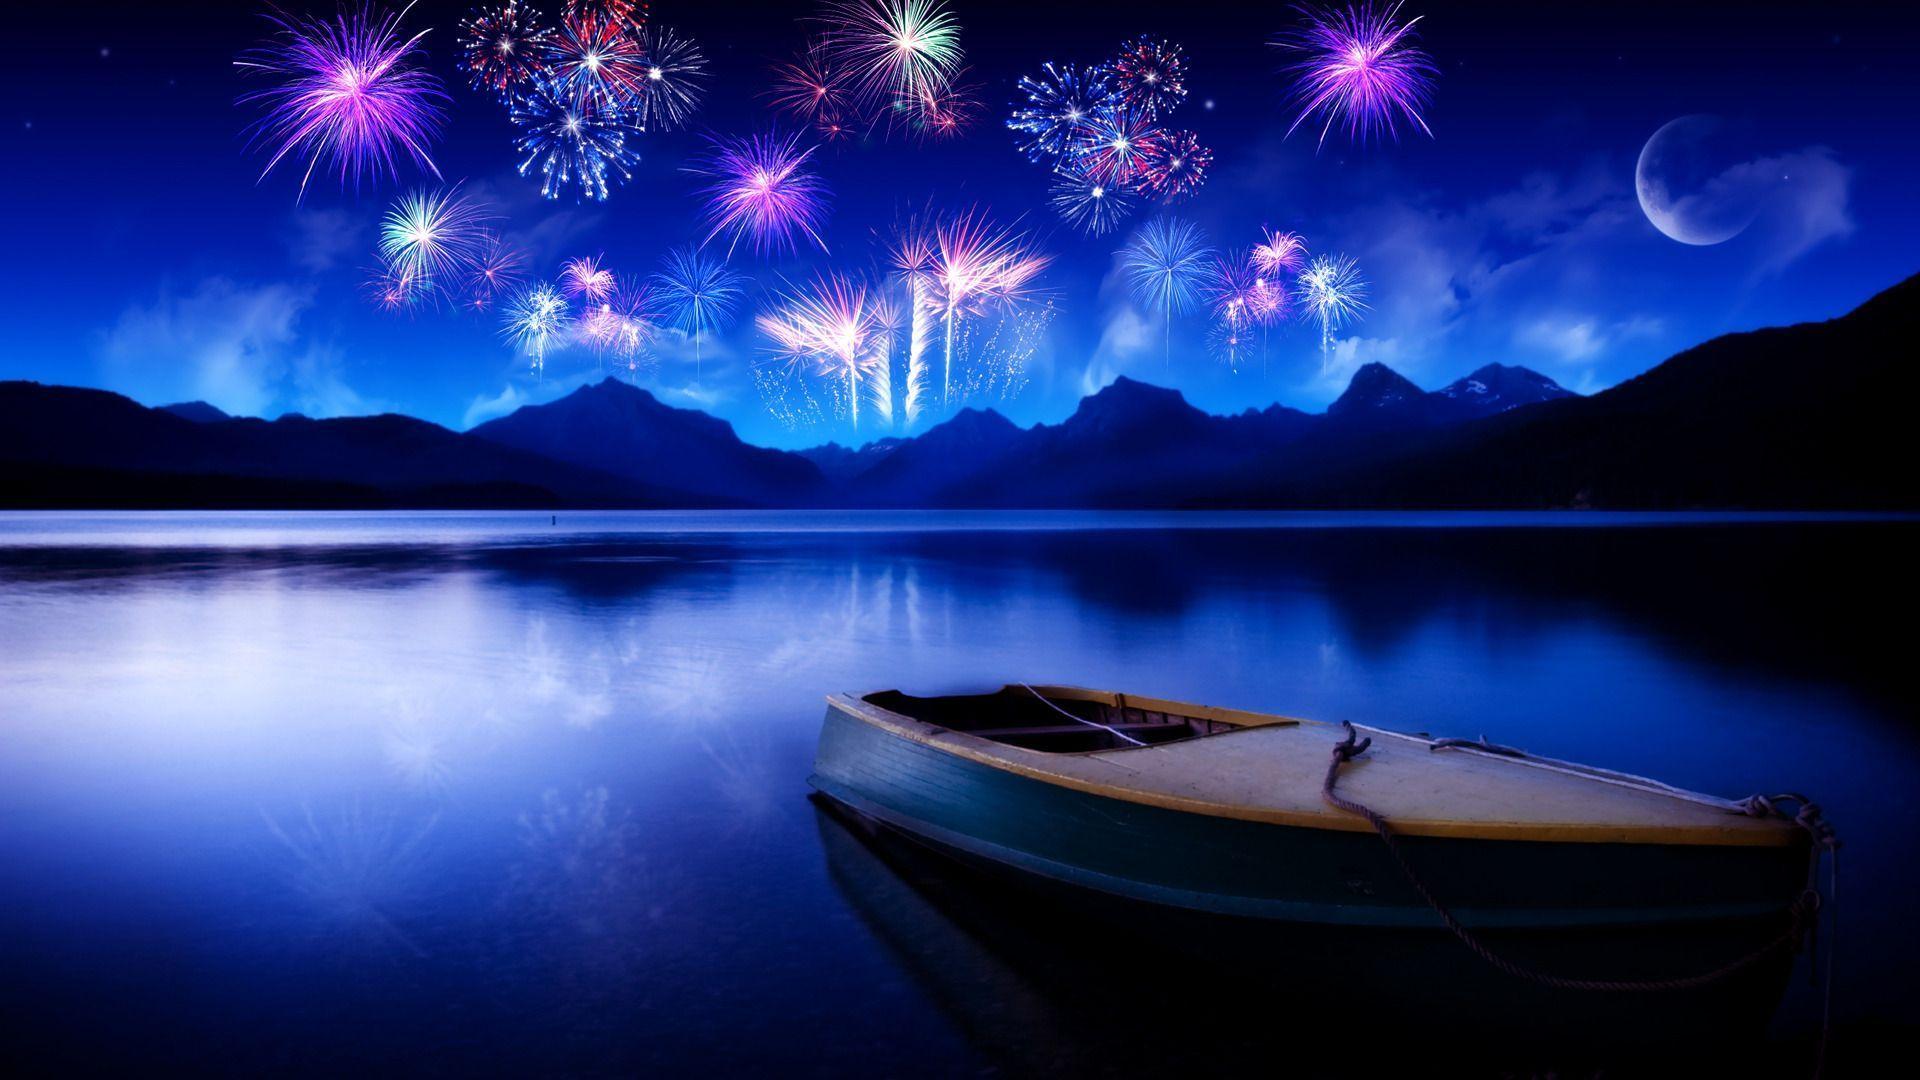 HD Background Fireworks Image Nature Wallpaper. Download Free